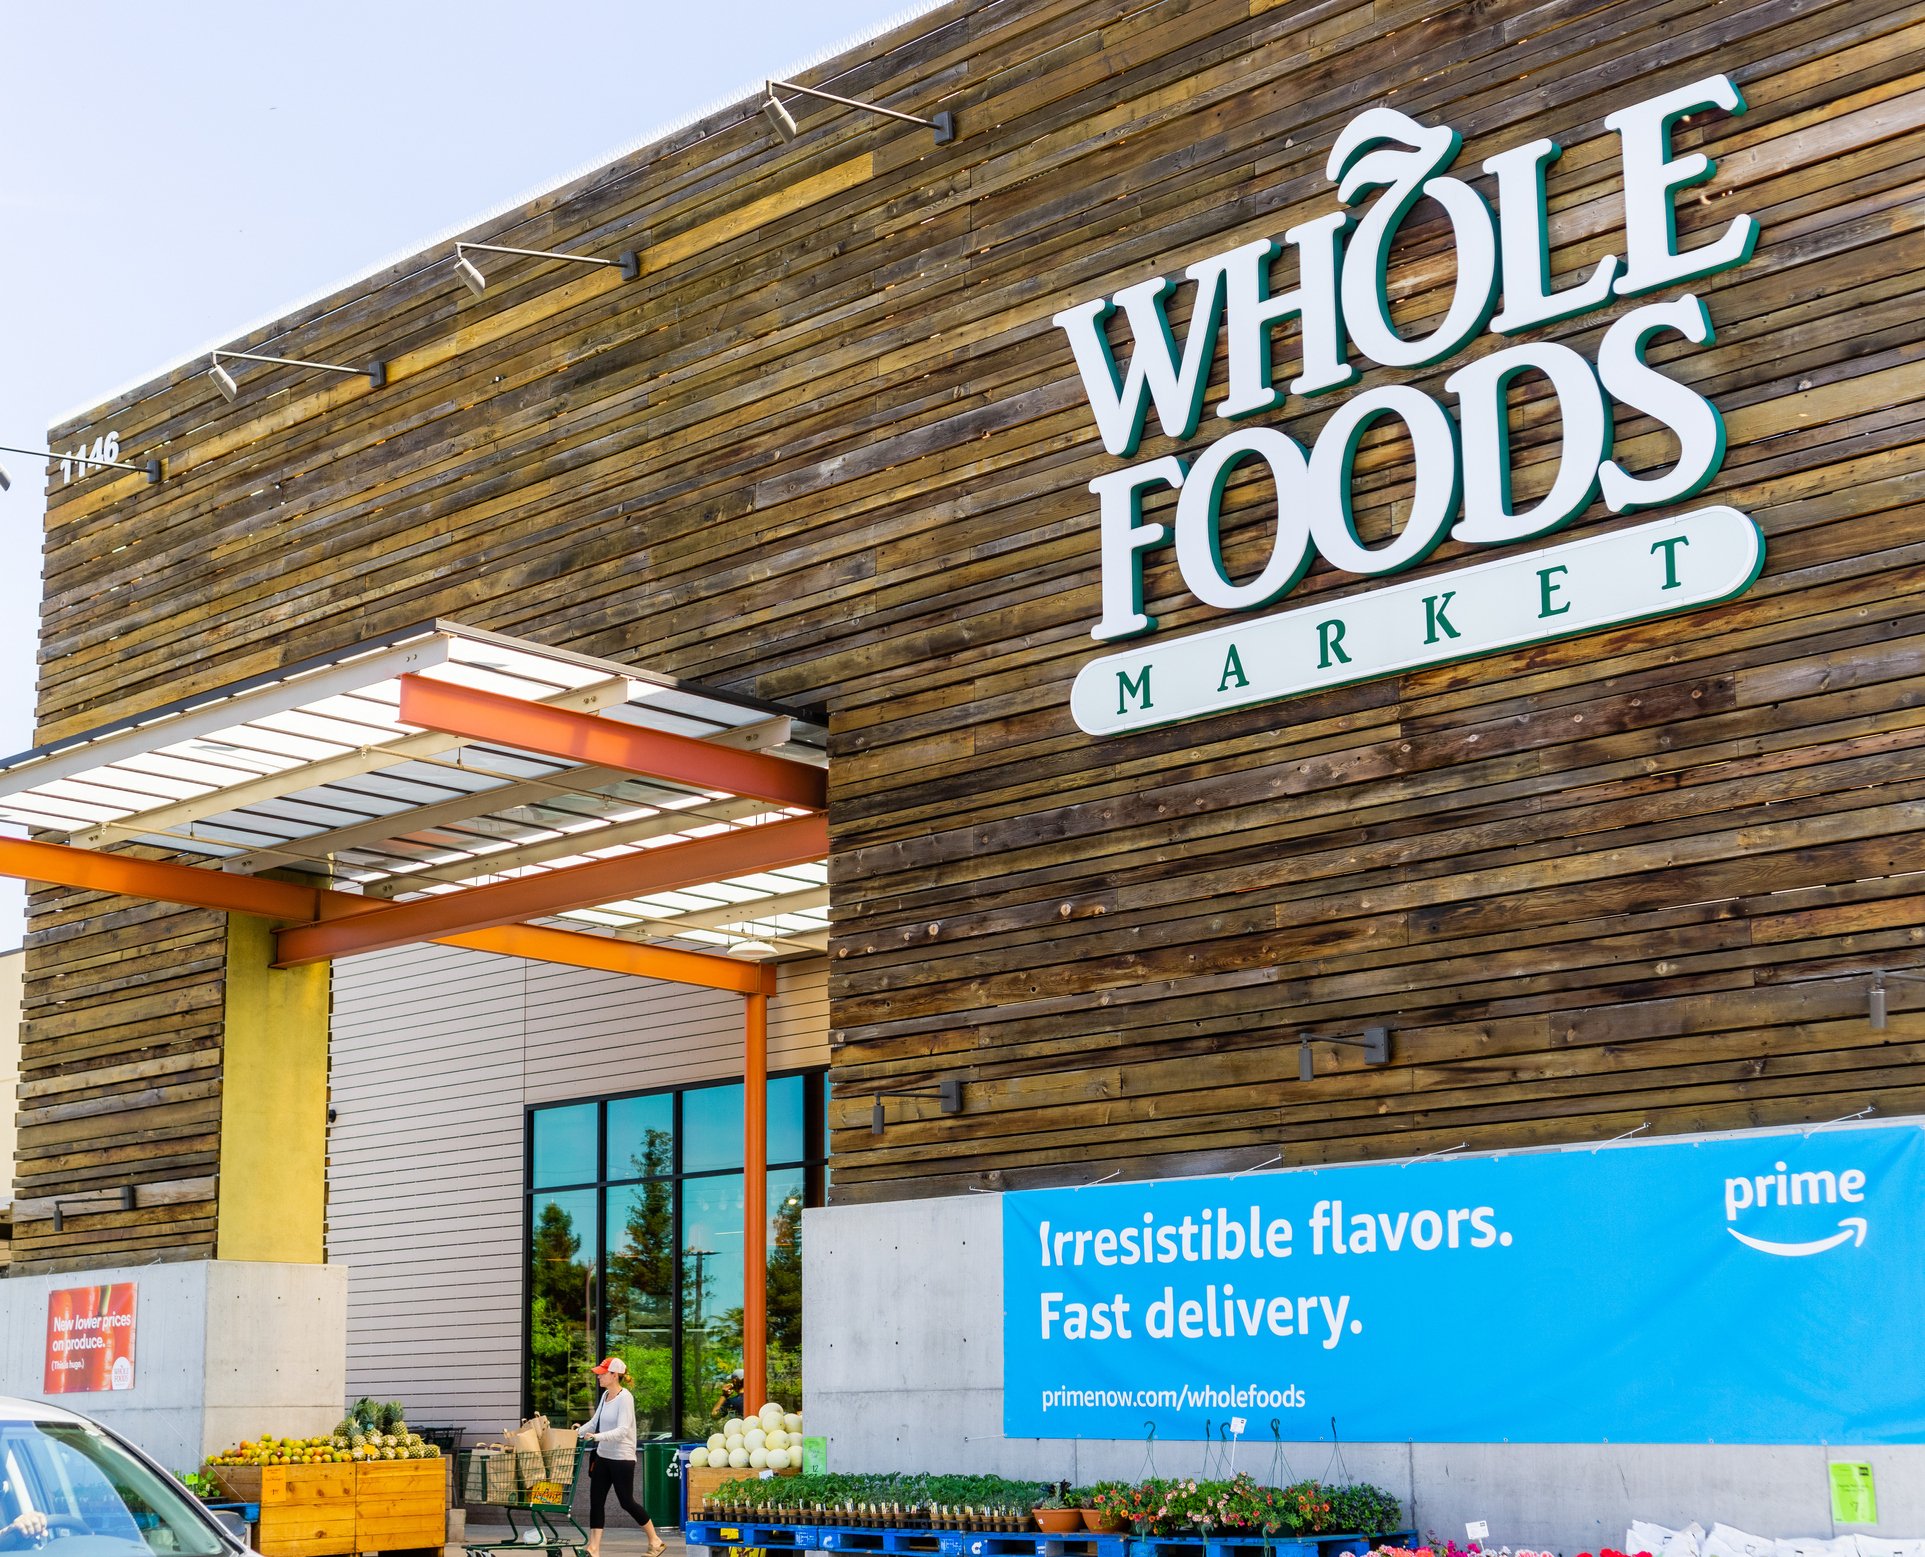 Amazon pushes palm-paying tech into more Whole Foods stores